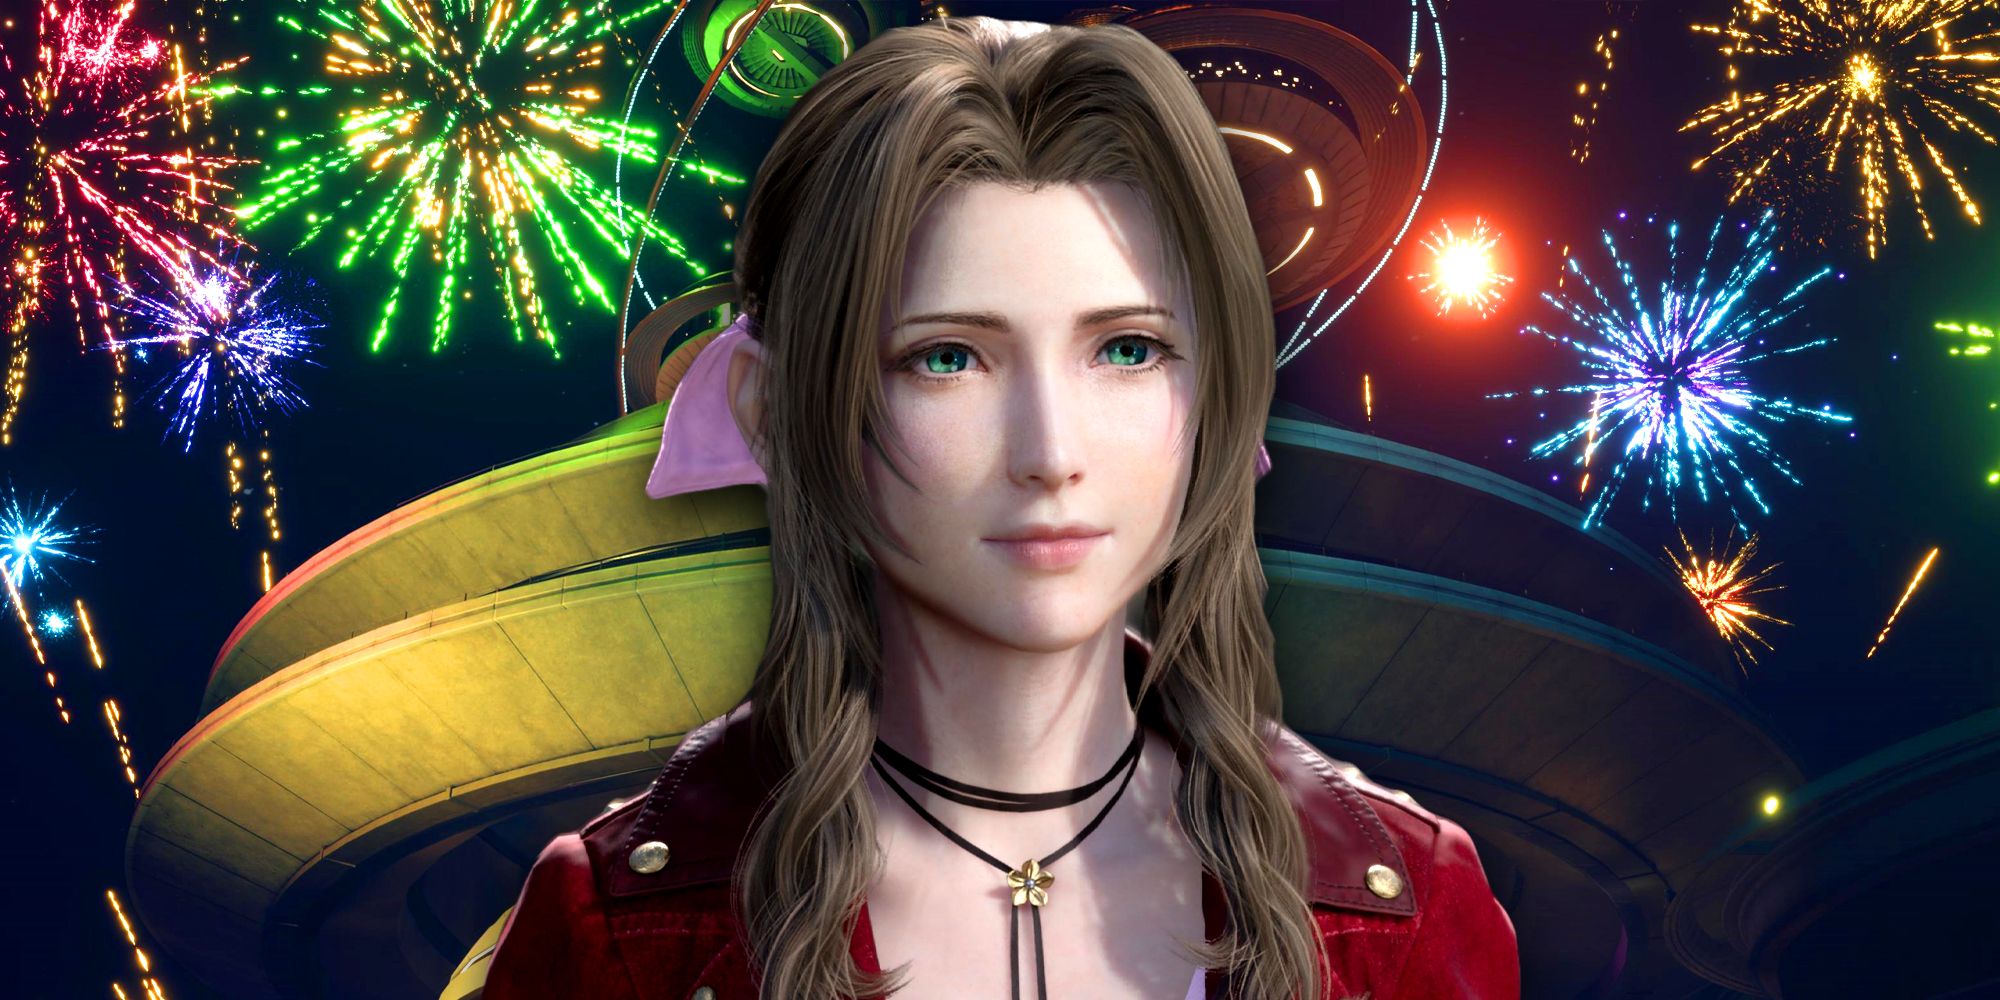 Aerith in front of the Gold Saucer and fireworks in FF7 Rebirth.